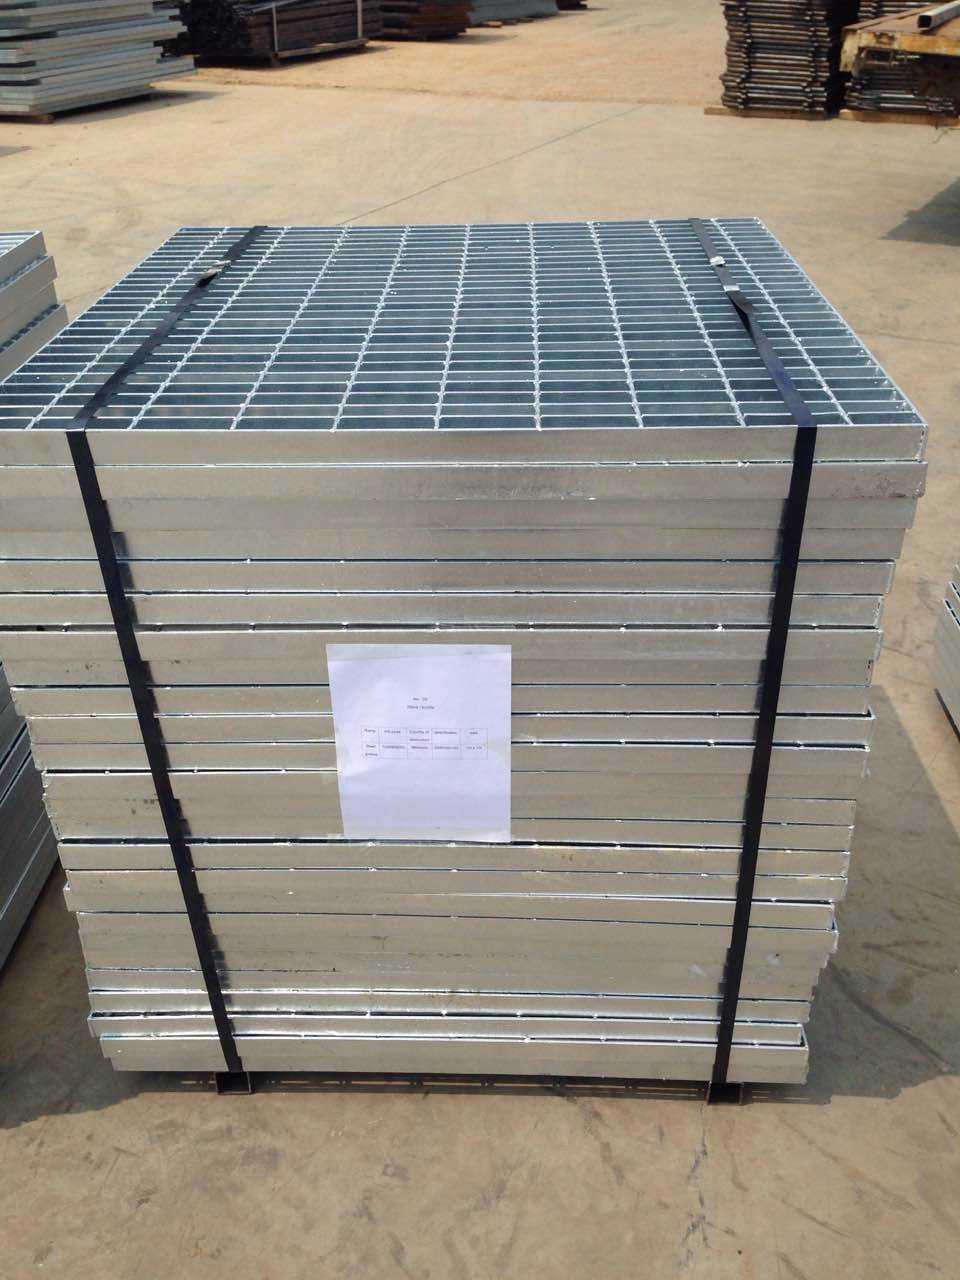 Covered Steel Stainless / Drainage Grid Flooring / Concrete Steel Grating